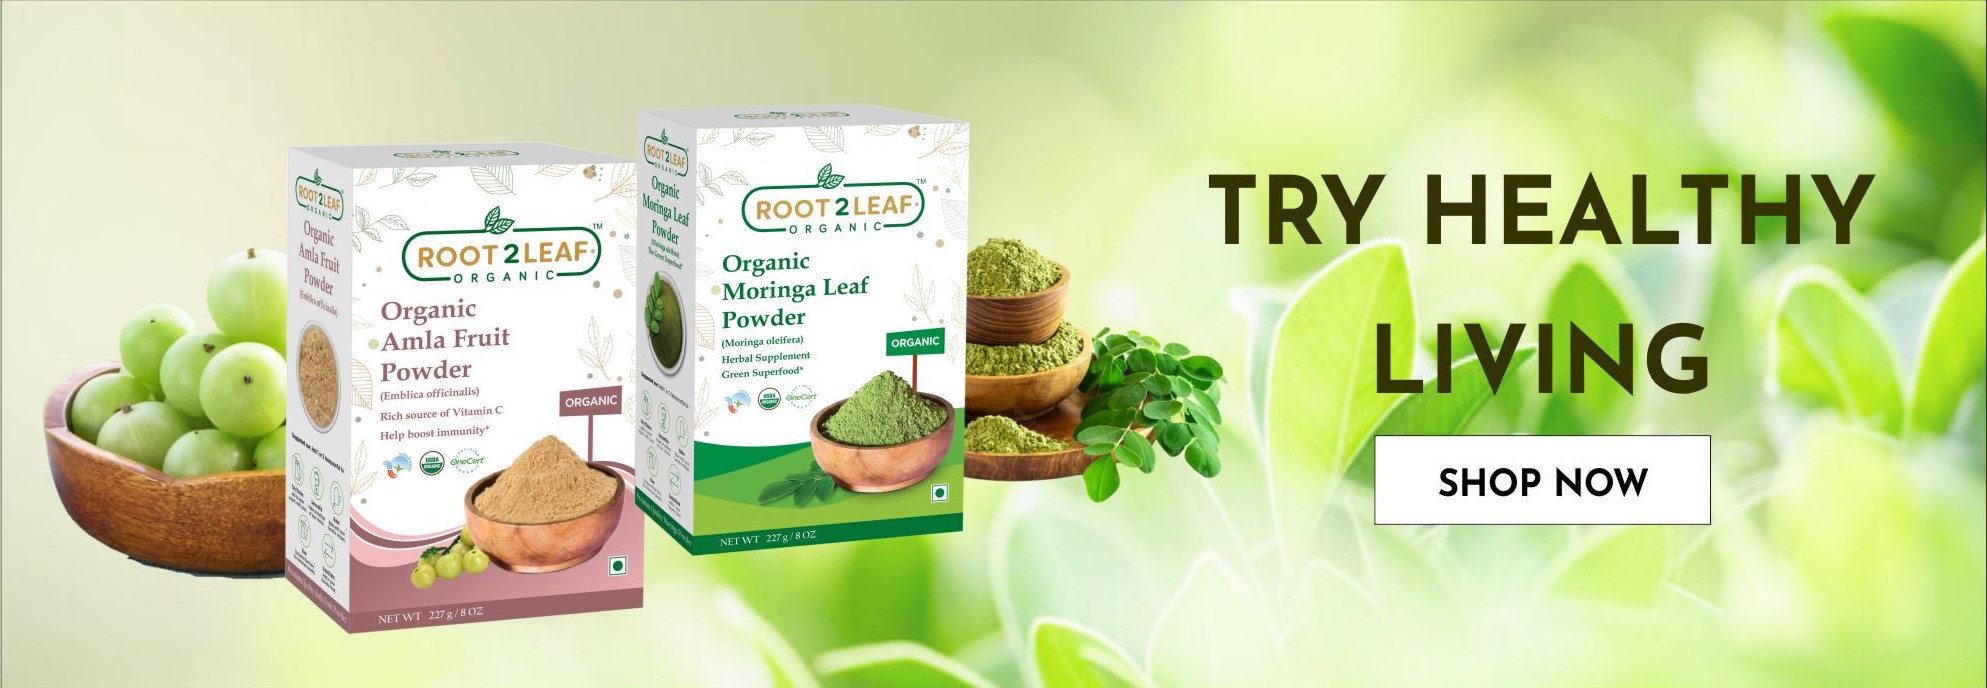 Root2Leaf Organic Try Healthy Living